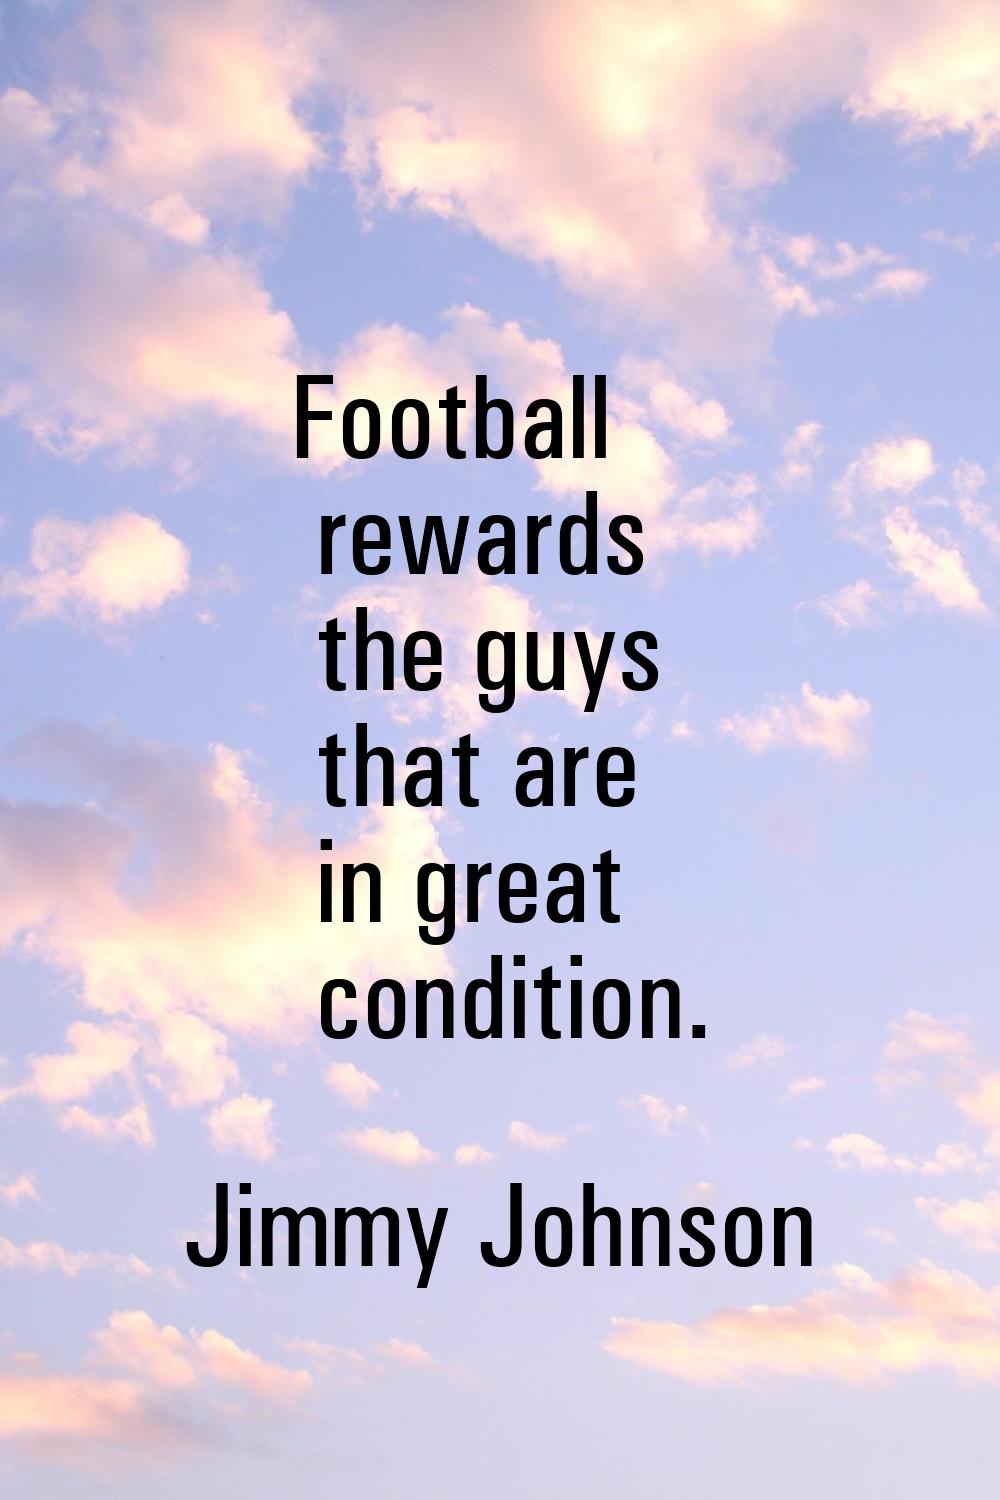 Football rewards the guys that are in great condition.